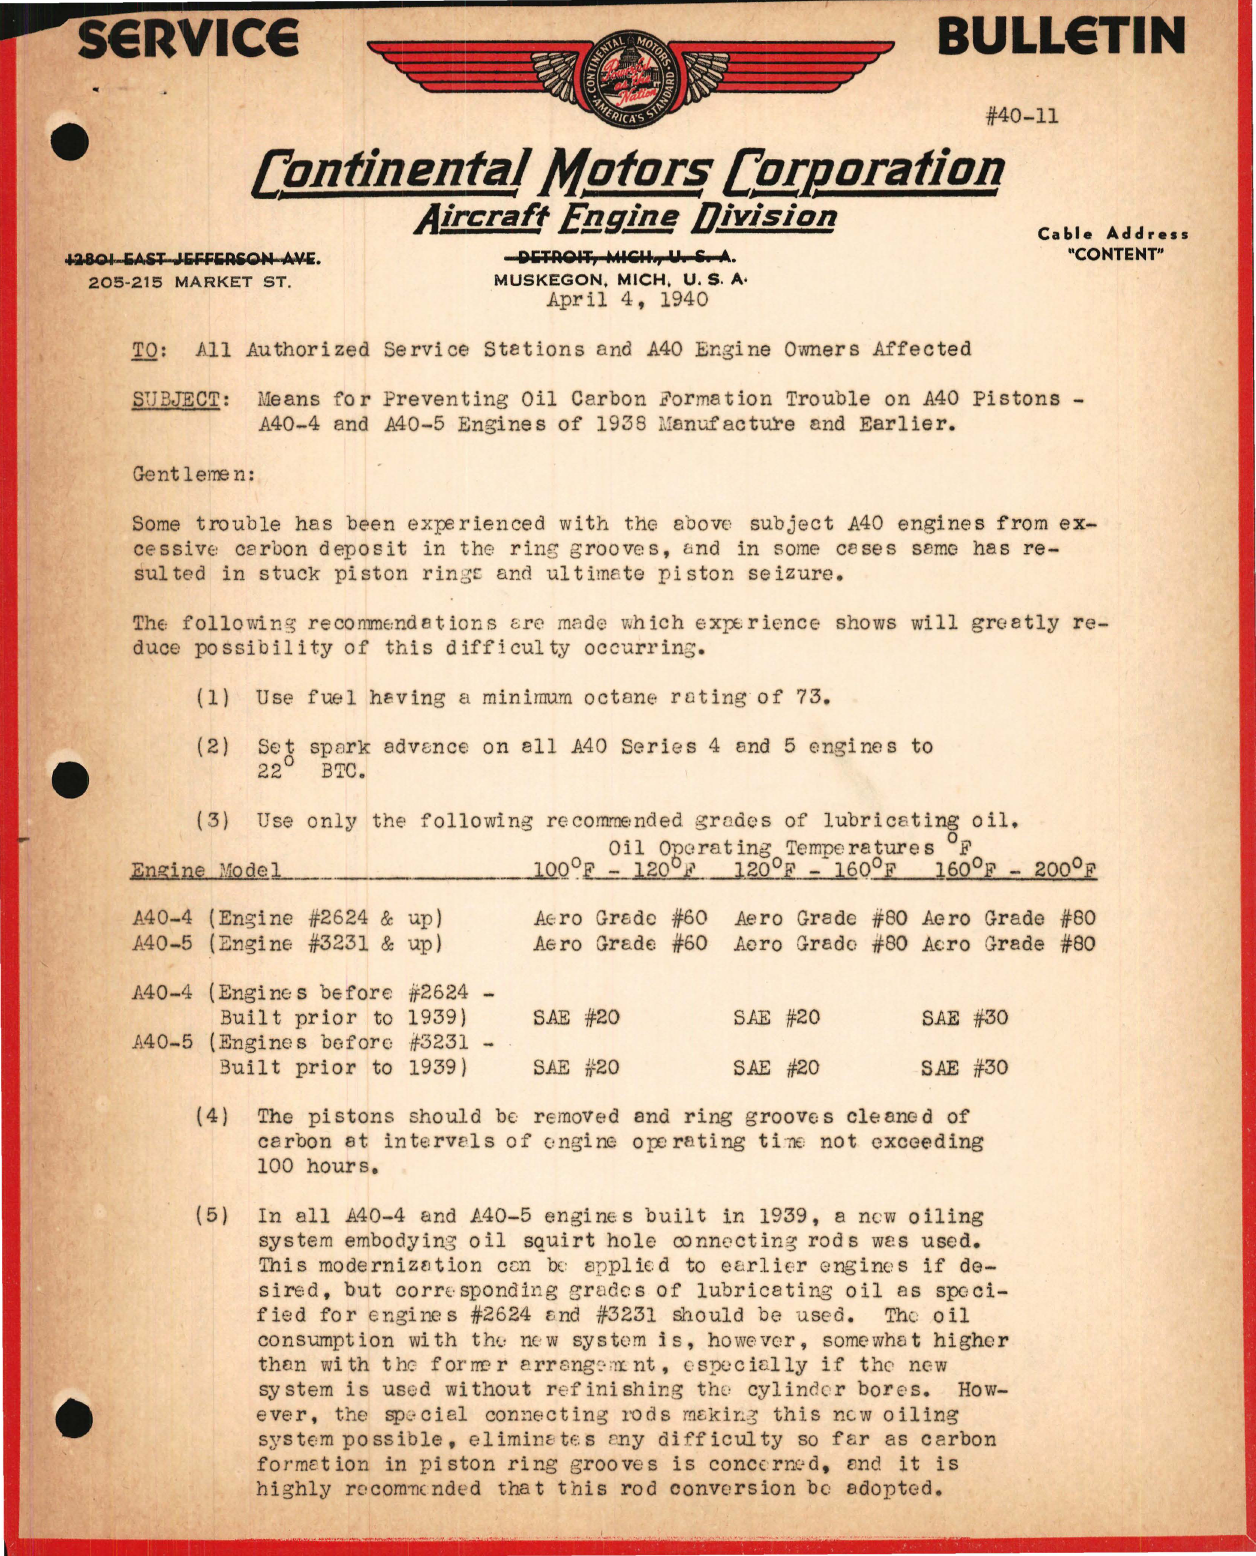 Sample page 1 from AirCorps Library document: Means for Preventing Oil Carbon Formation Trouble on A40 Pistons - A40-4 and A40-5 Engines of 1938 and Earlier